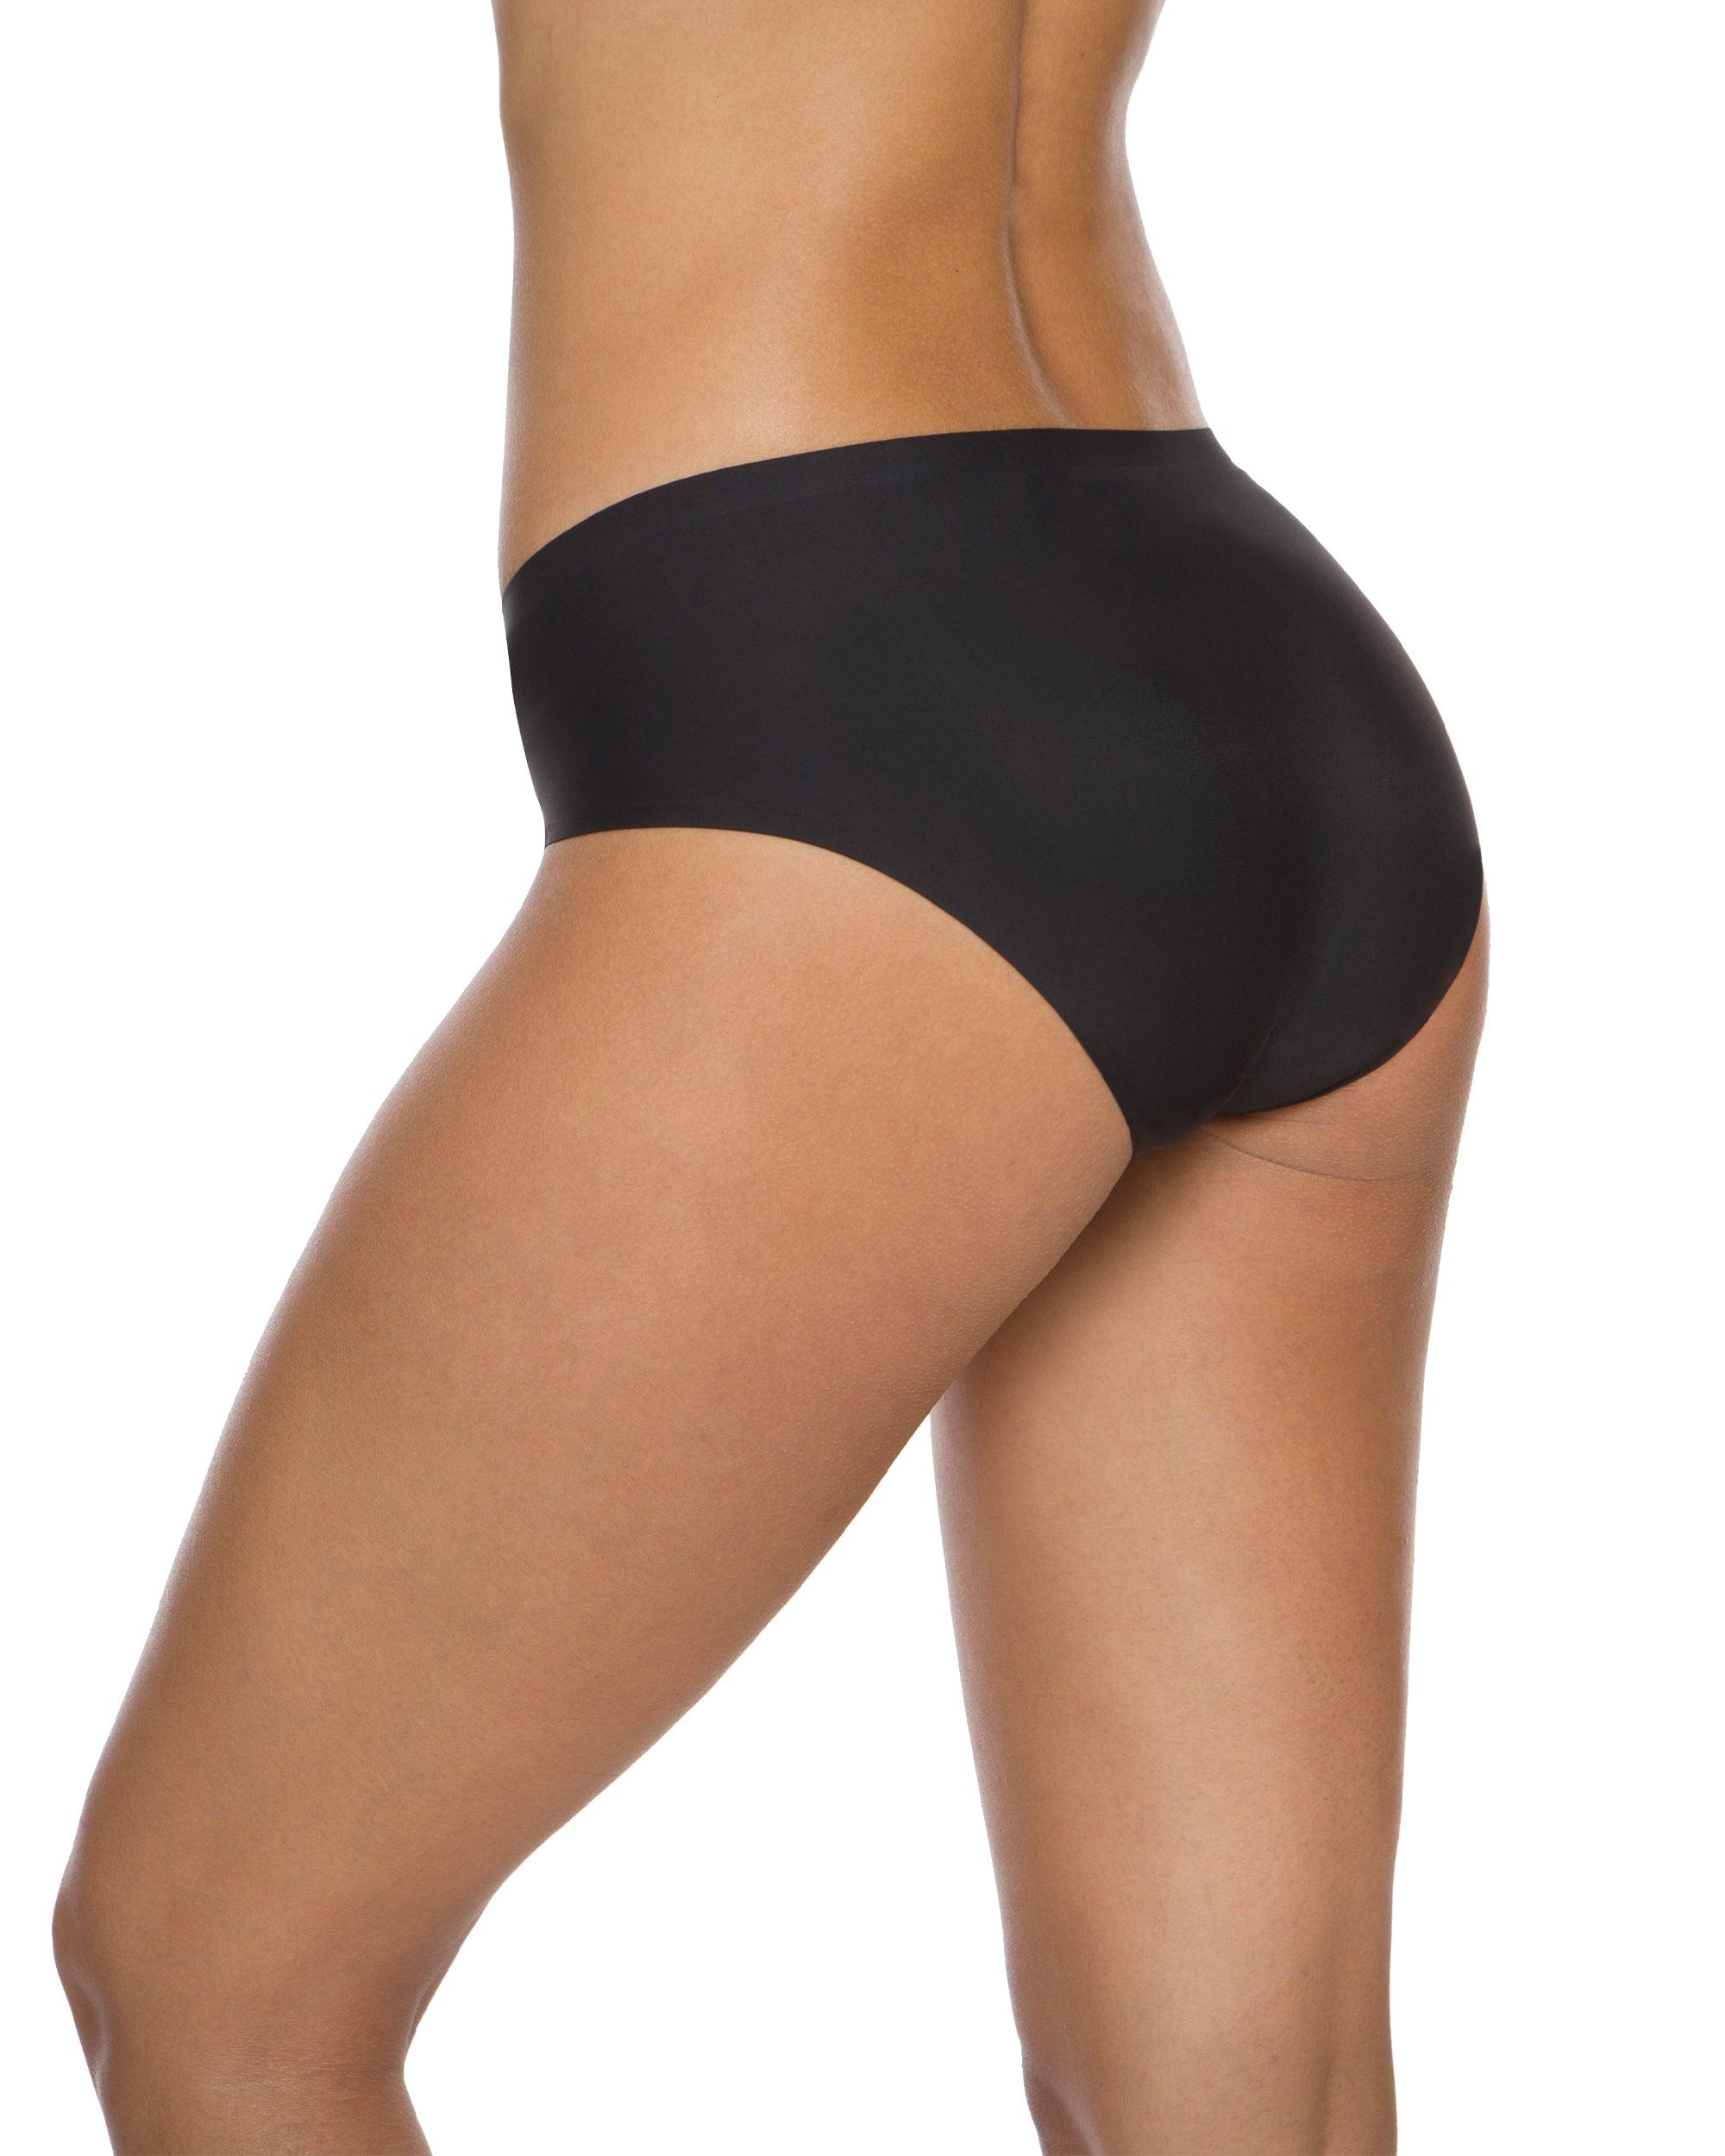 ALTHEANRAY Women's 6-Pack Seamless Hipster Underwear No Show